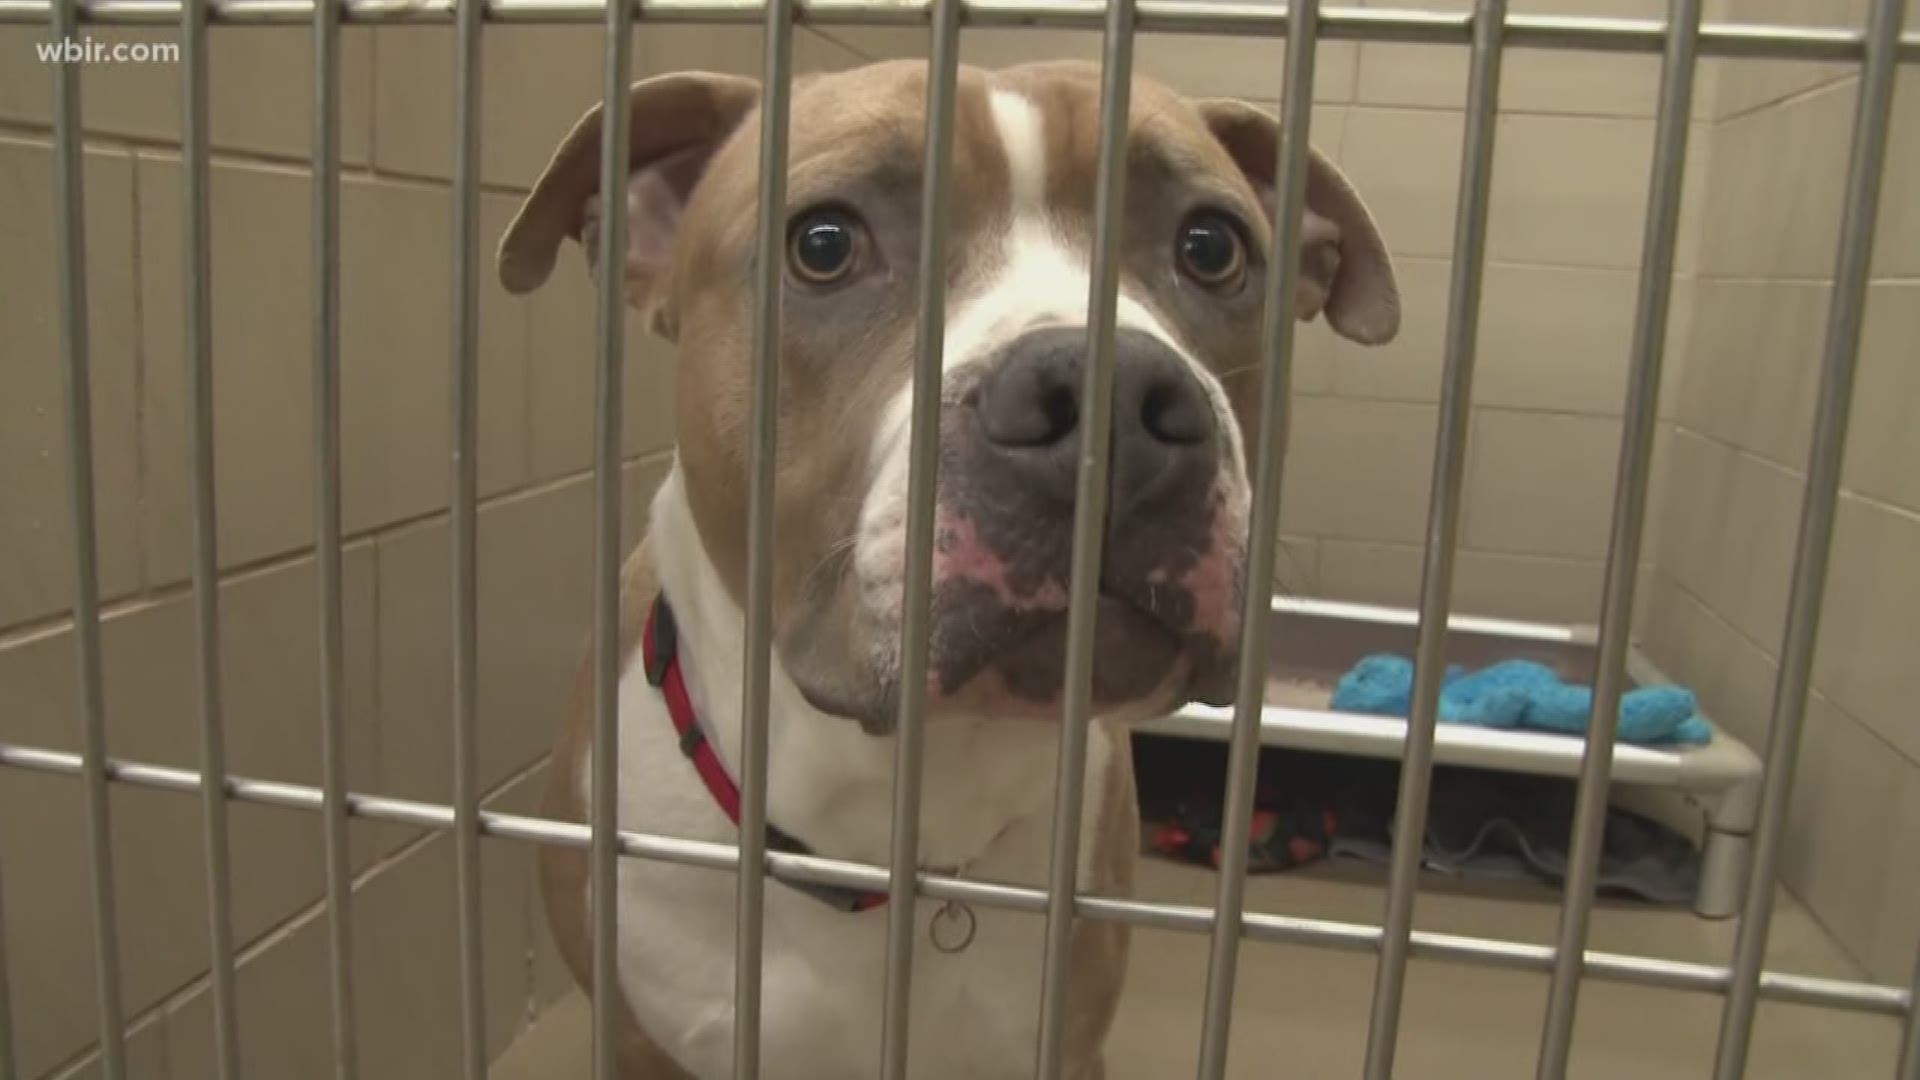 Young-Williams Animal Center is currently packed with pets that ran away around July 4th. 10News reporter Yvonne Thomas is at the shelter as it says it's at critical capacity.